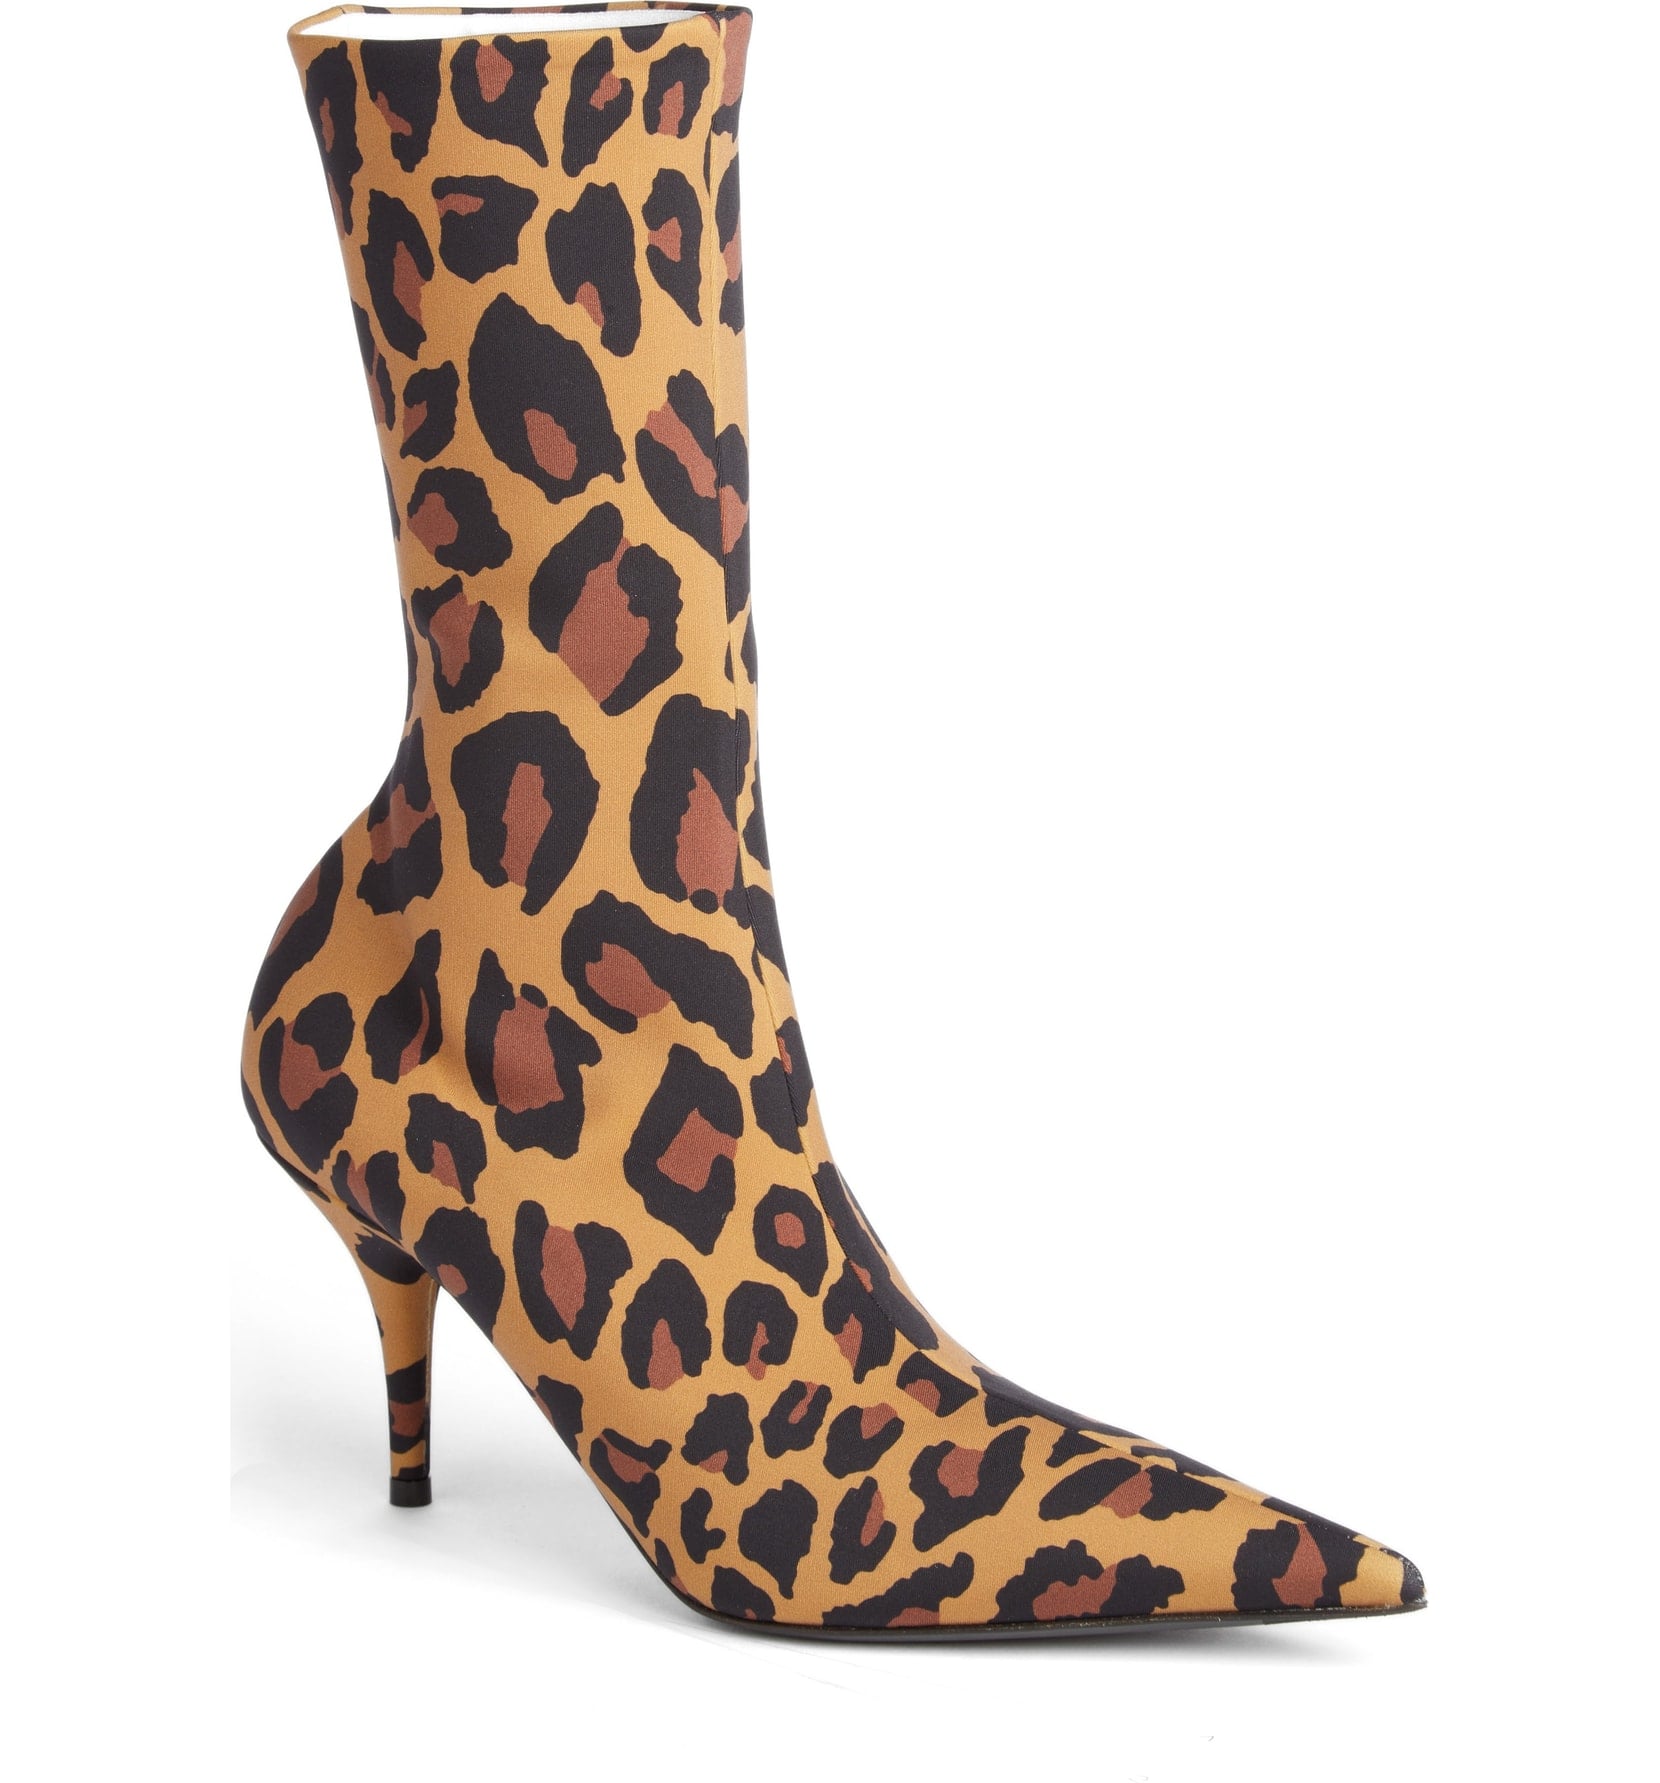 leopard print pointed boots